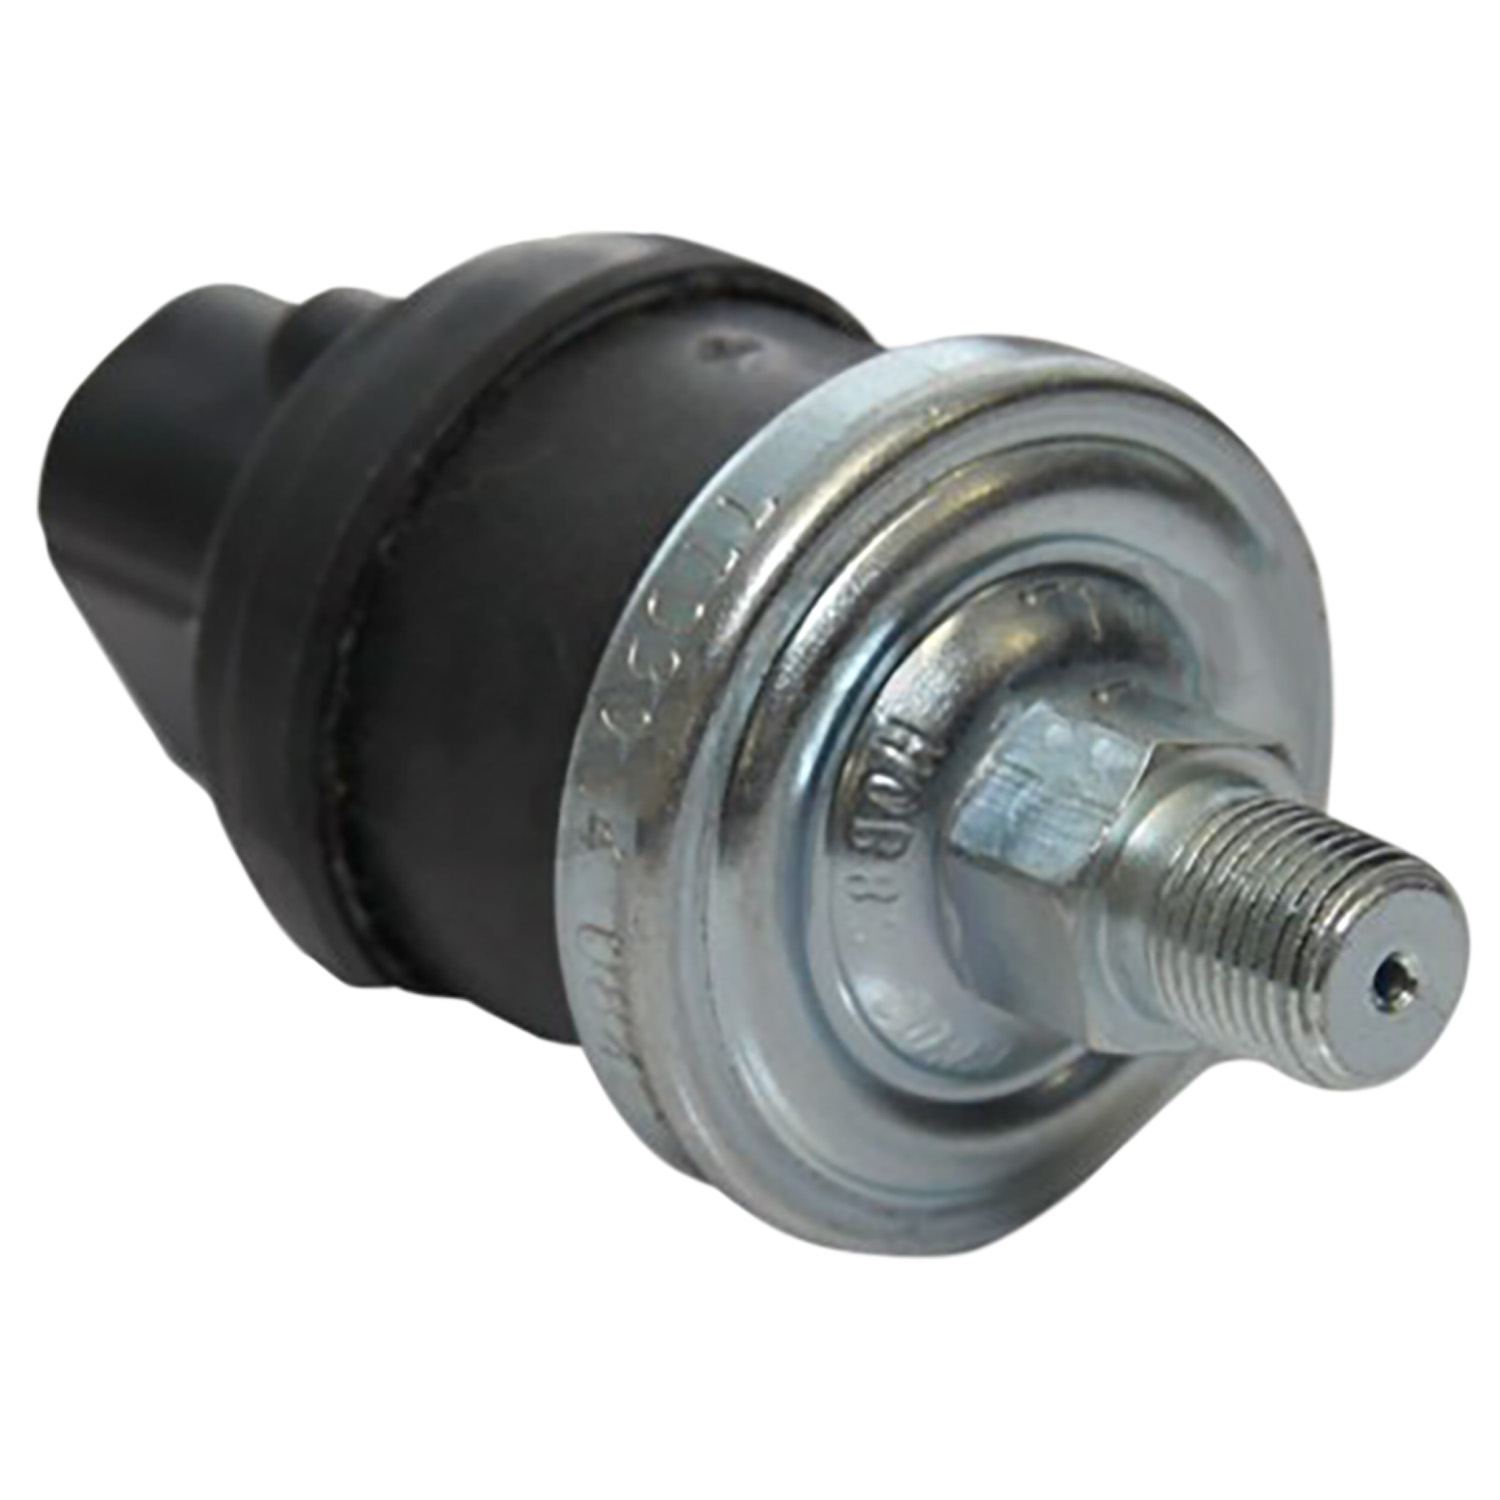 Pressure Switch, 7PSI, SPST M/P280S *** RCS-007 or HIH REQUIRED FOR CO